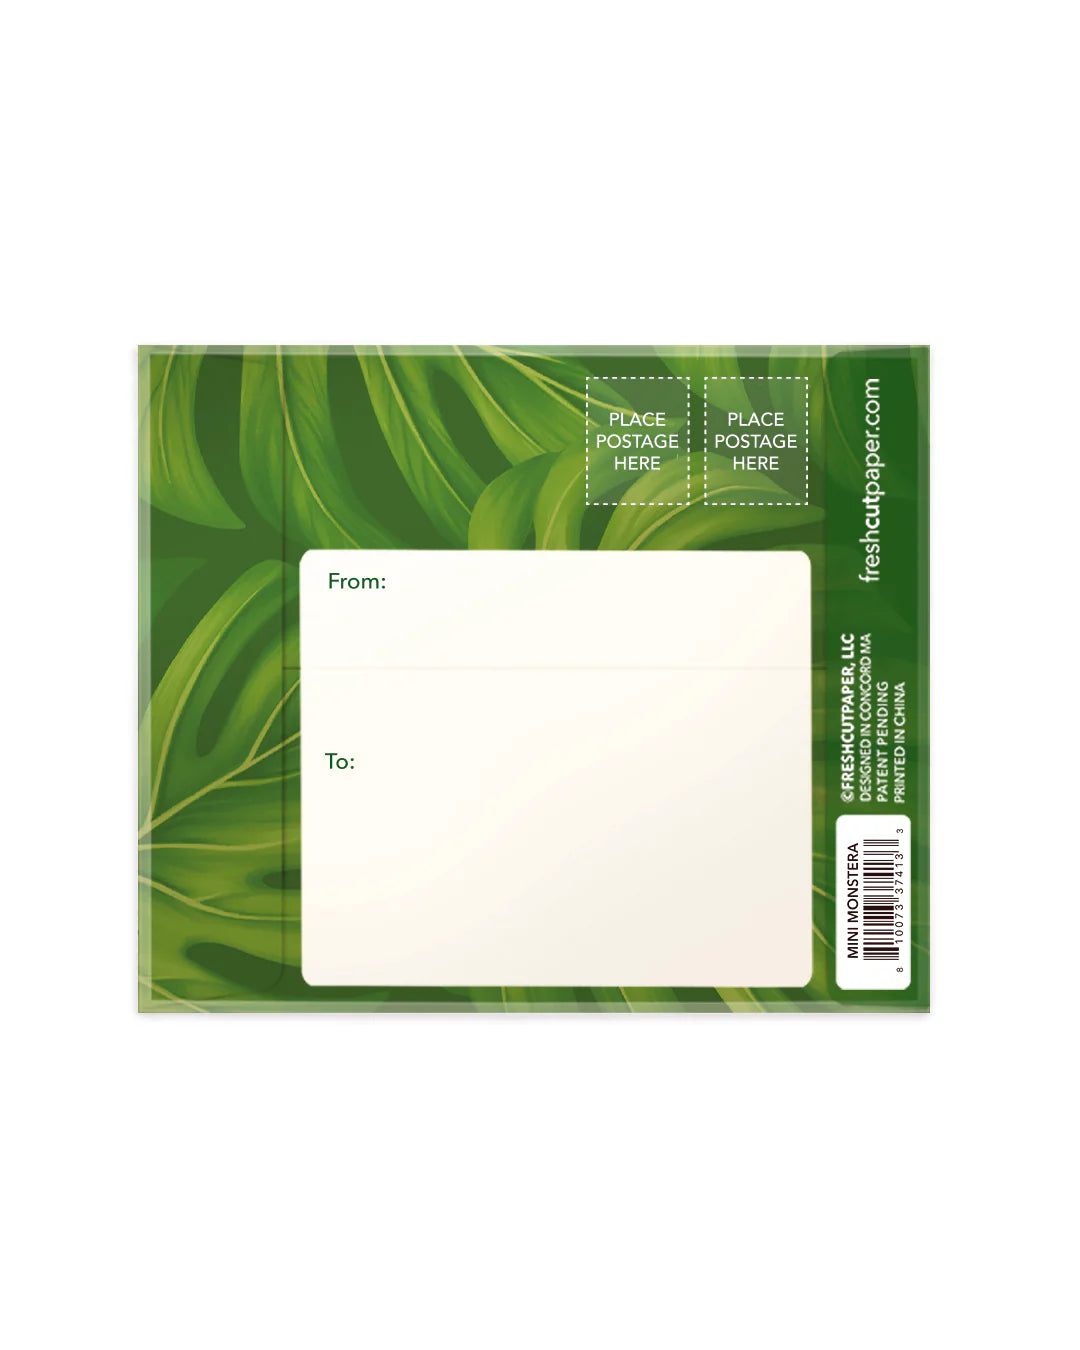 back view of green mailing envelope.